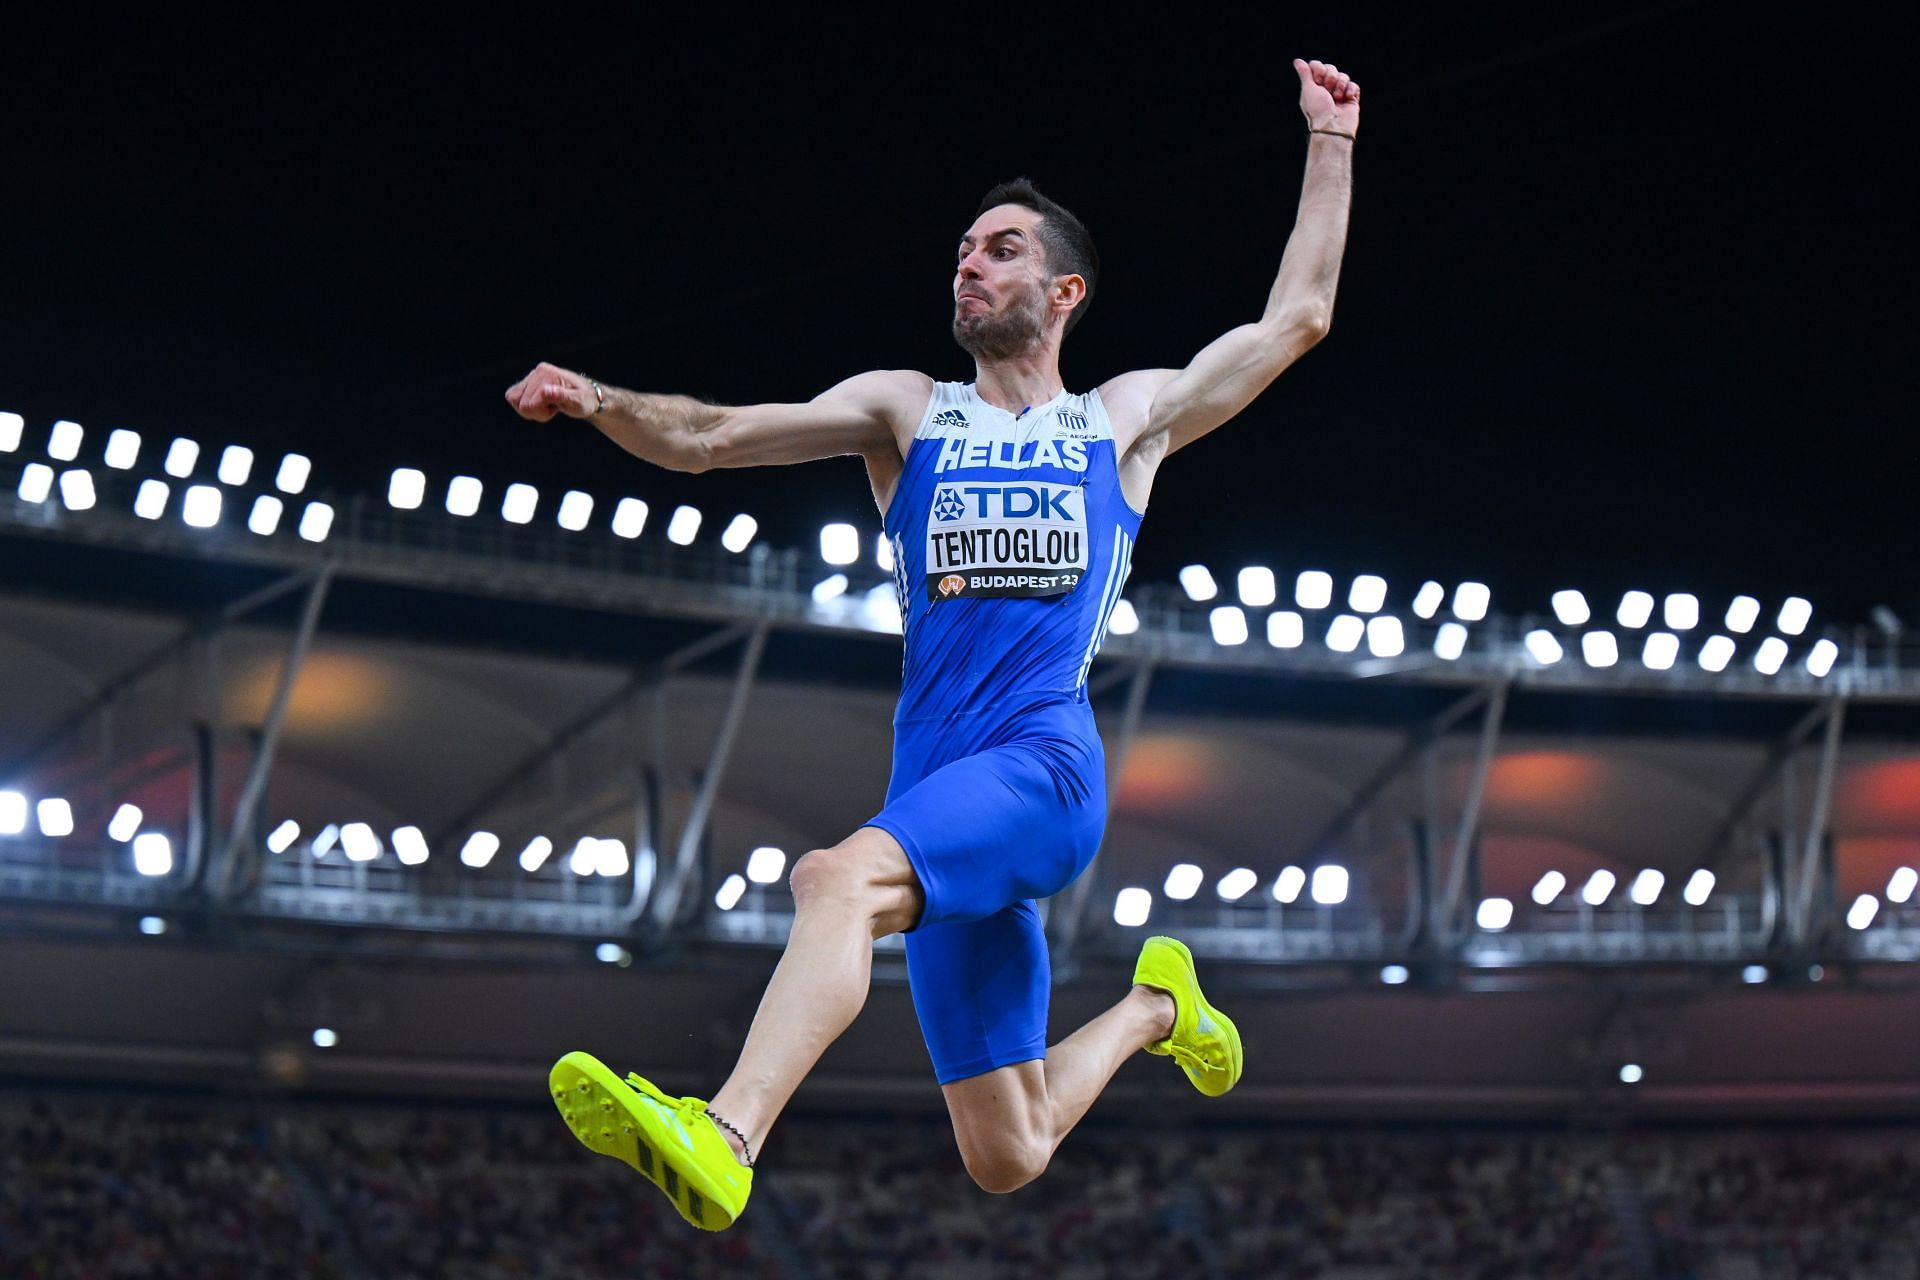 Miltiadis Tentoglou of Team Greece competes in the Men&#039;s Long Jump Final during Day 6 of the World Athletics Championships Budapest 2023